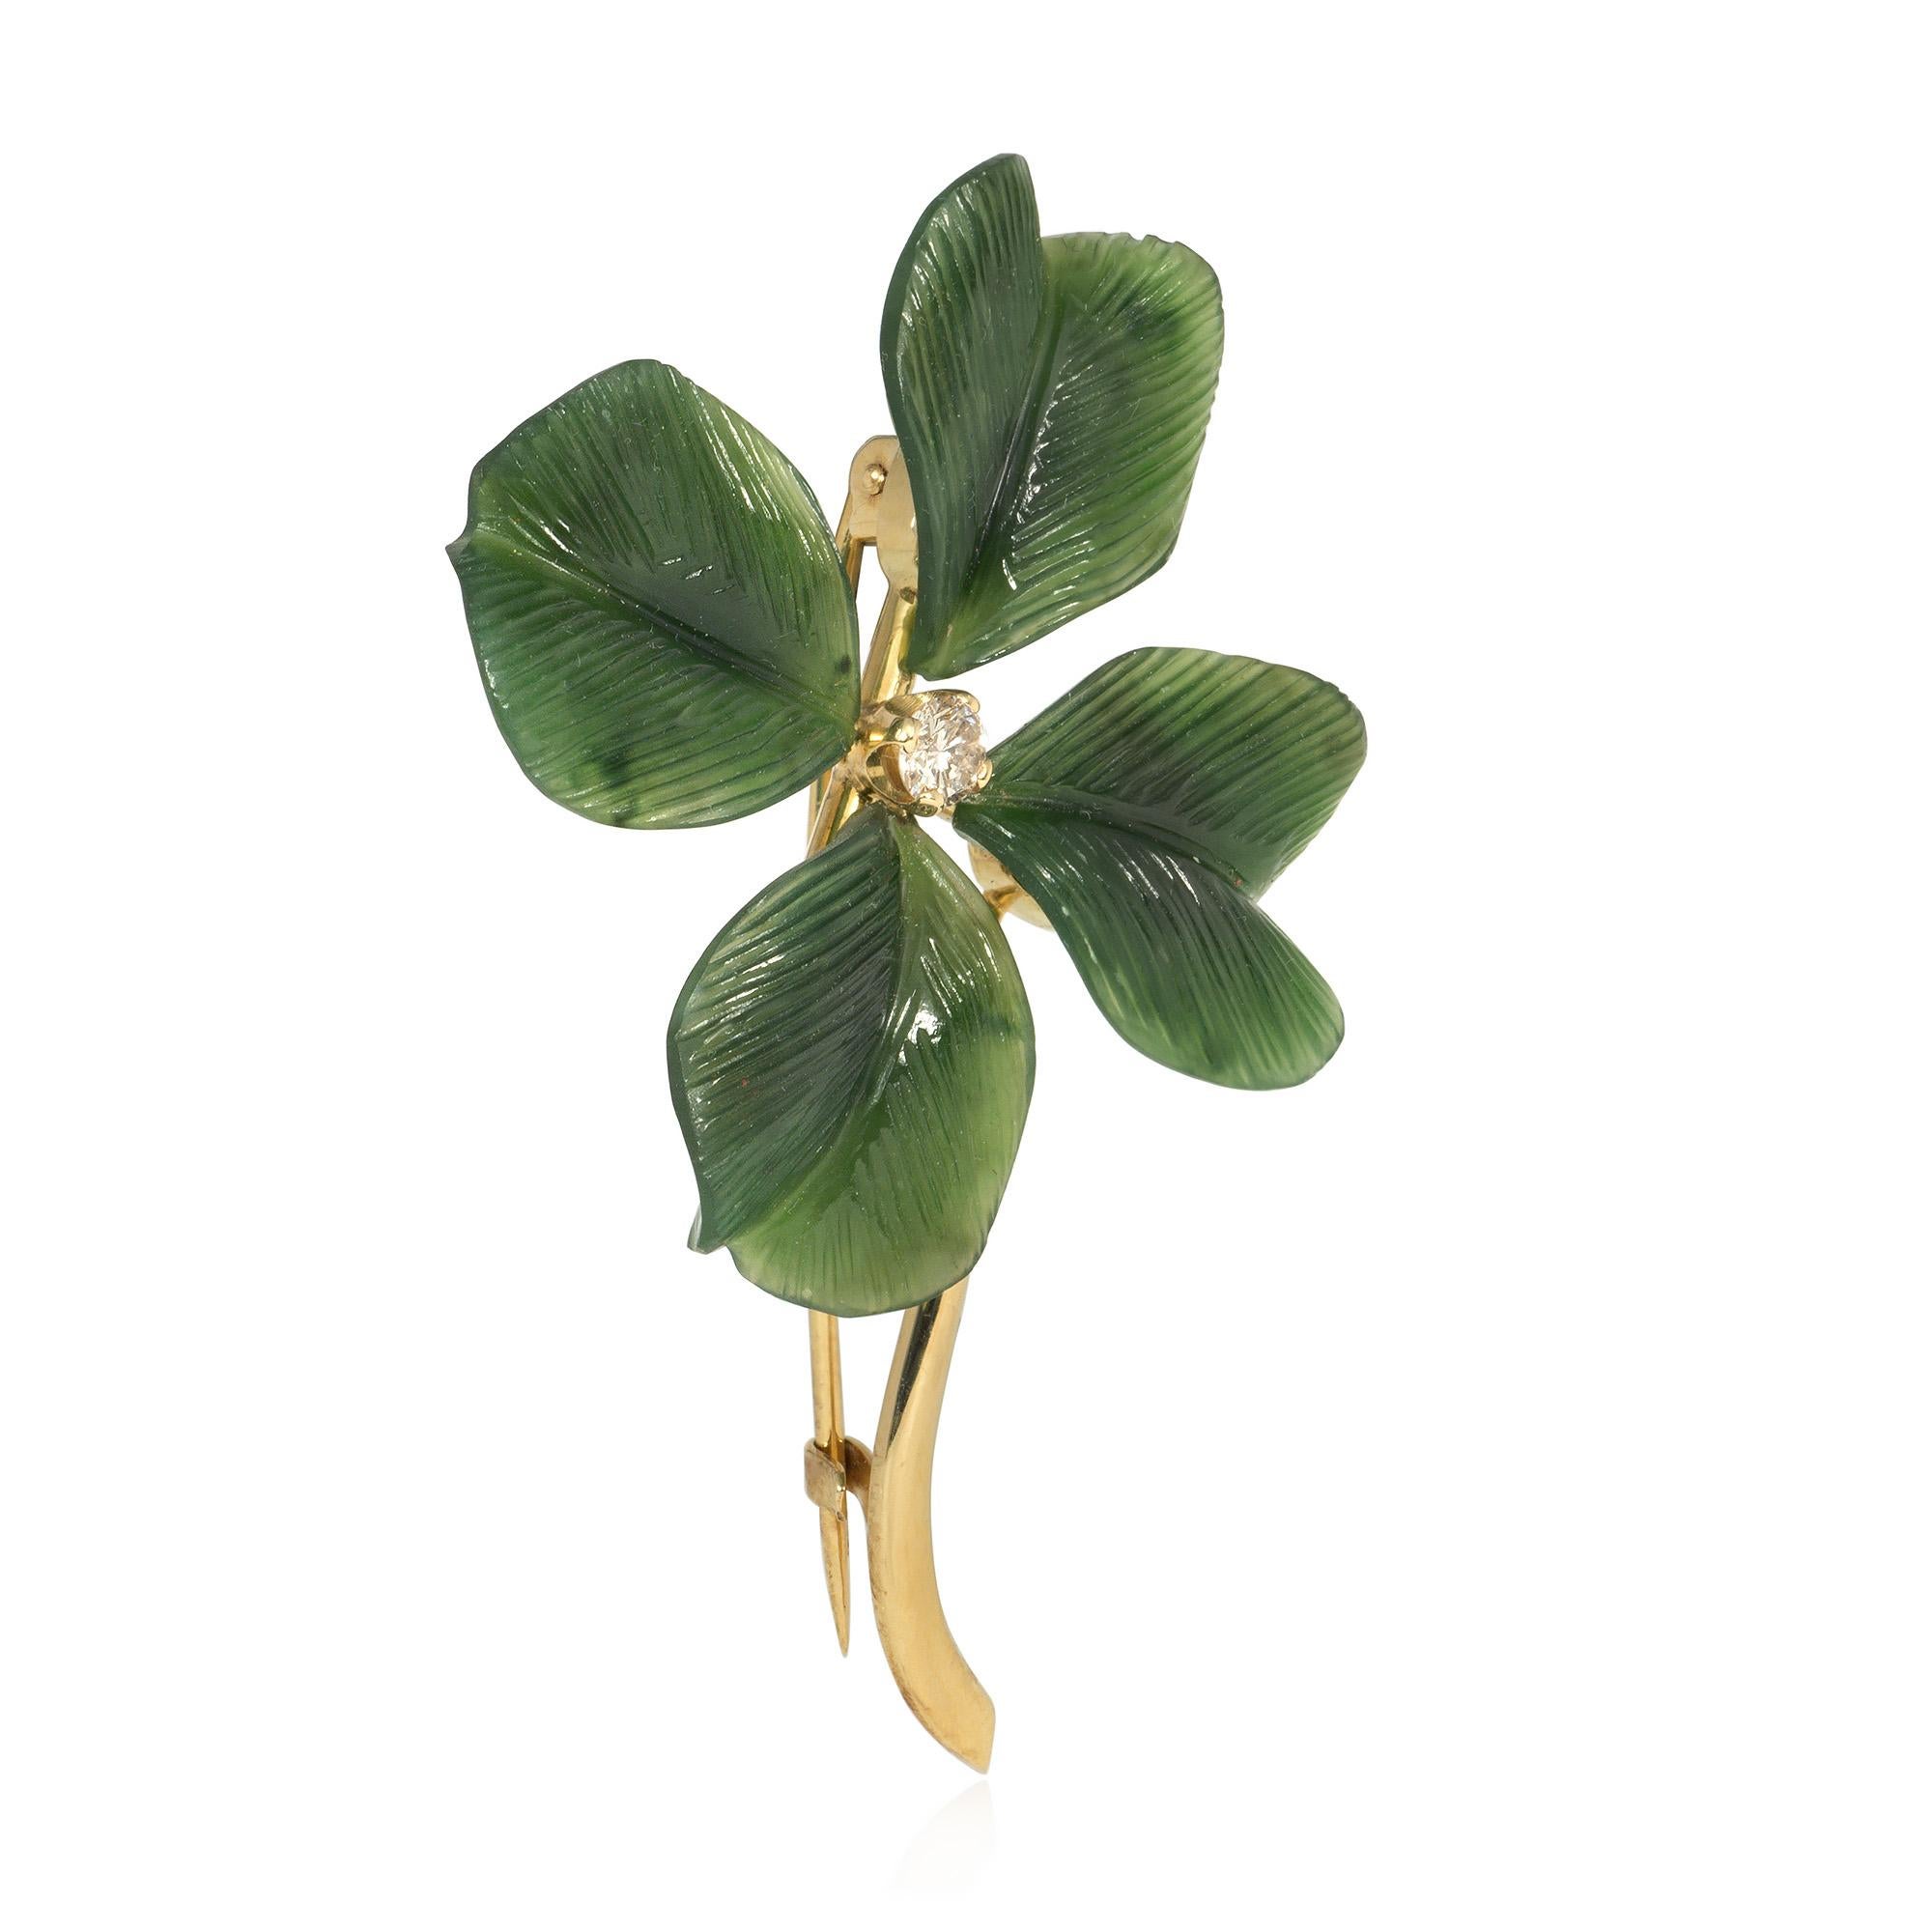 A Retro period gold and carved nephrite jade brooch in the form of a four leaf clover with a diamond center and gold stem, in 14k. Austria

Jade is often associated with nobility and wealth, and symbolizes harmony and balance. This is a highly